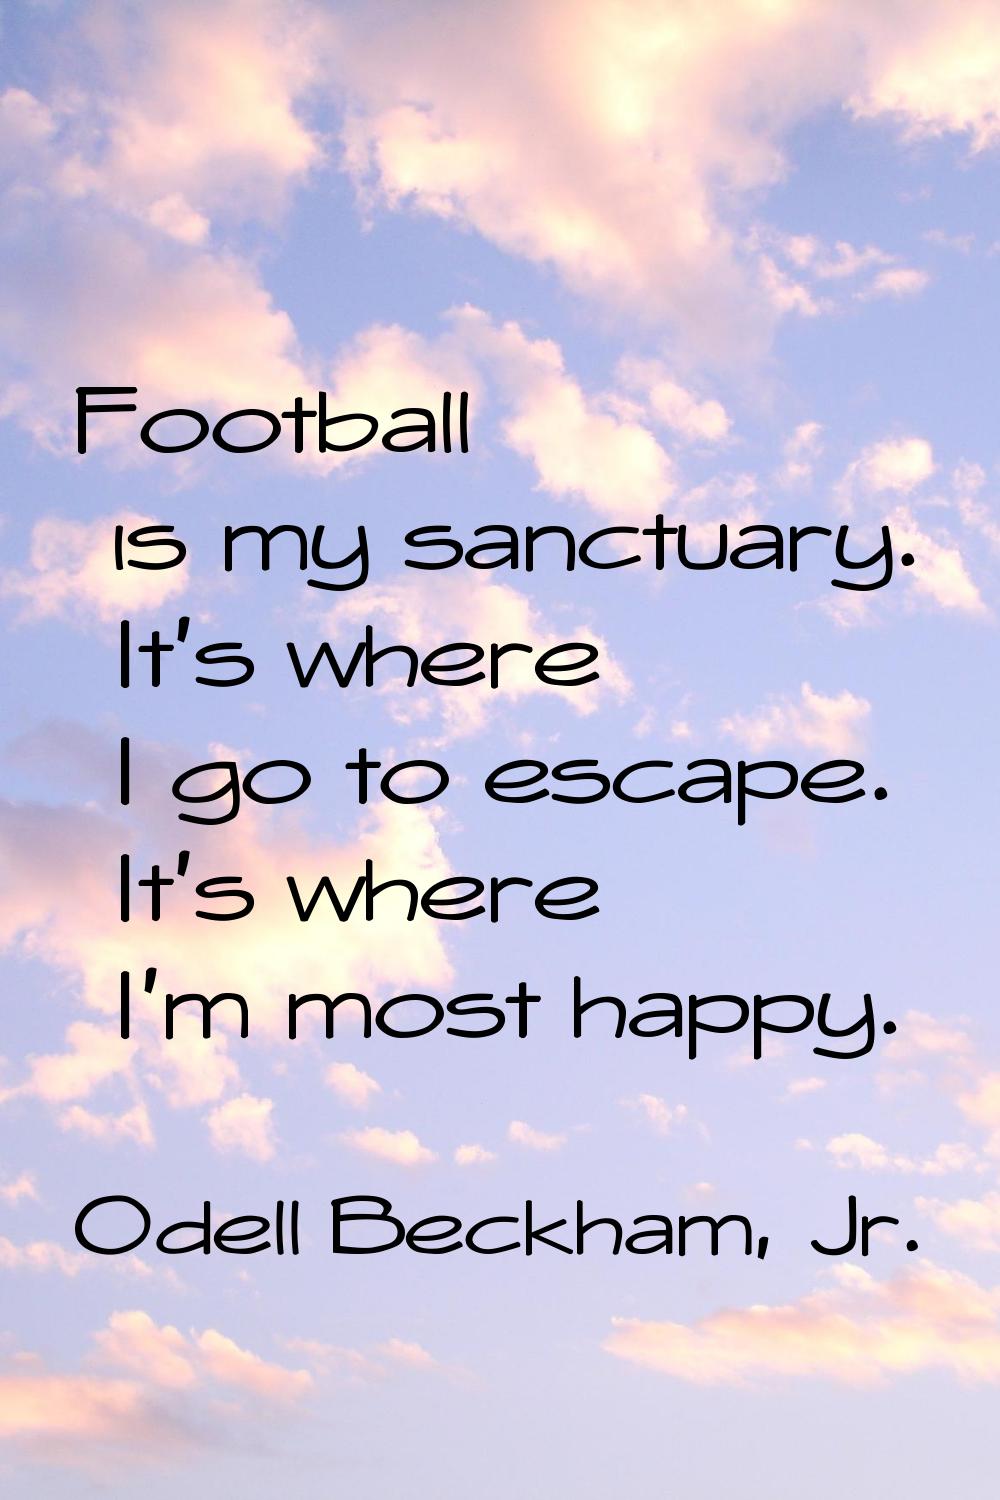 Football is my sanctuary. It's where I go to escape. It's where I'm most happy.